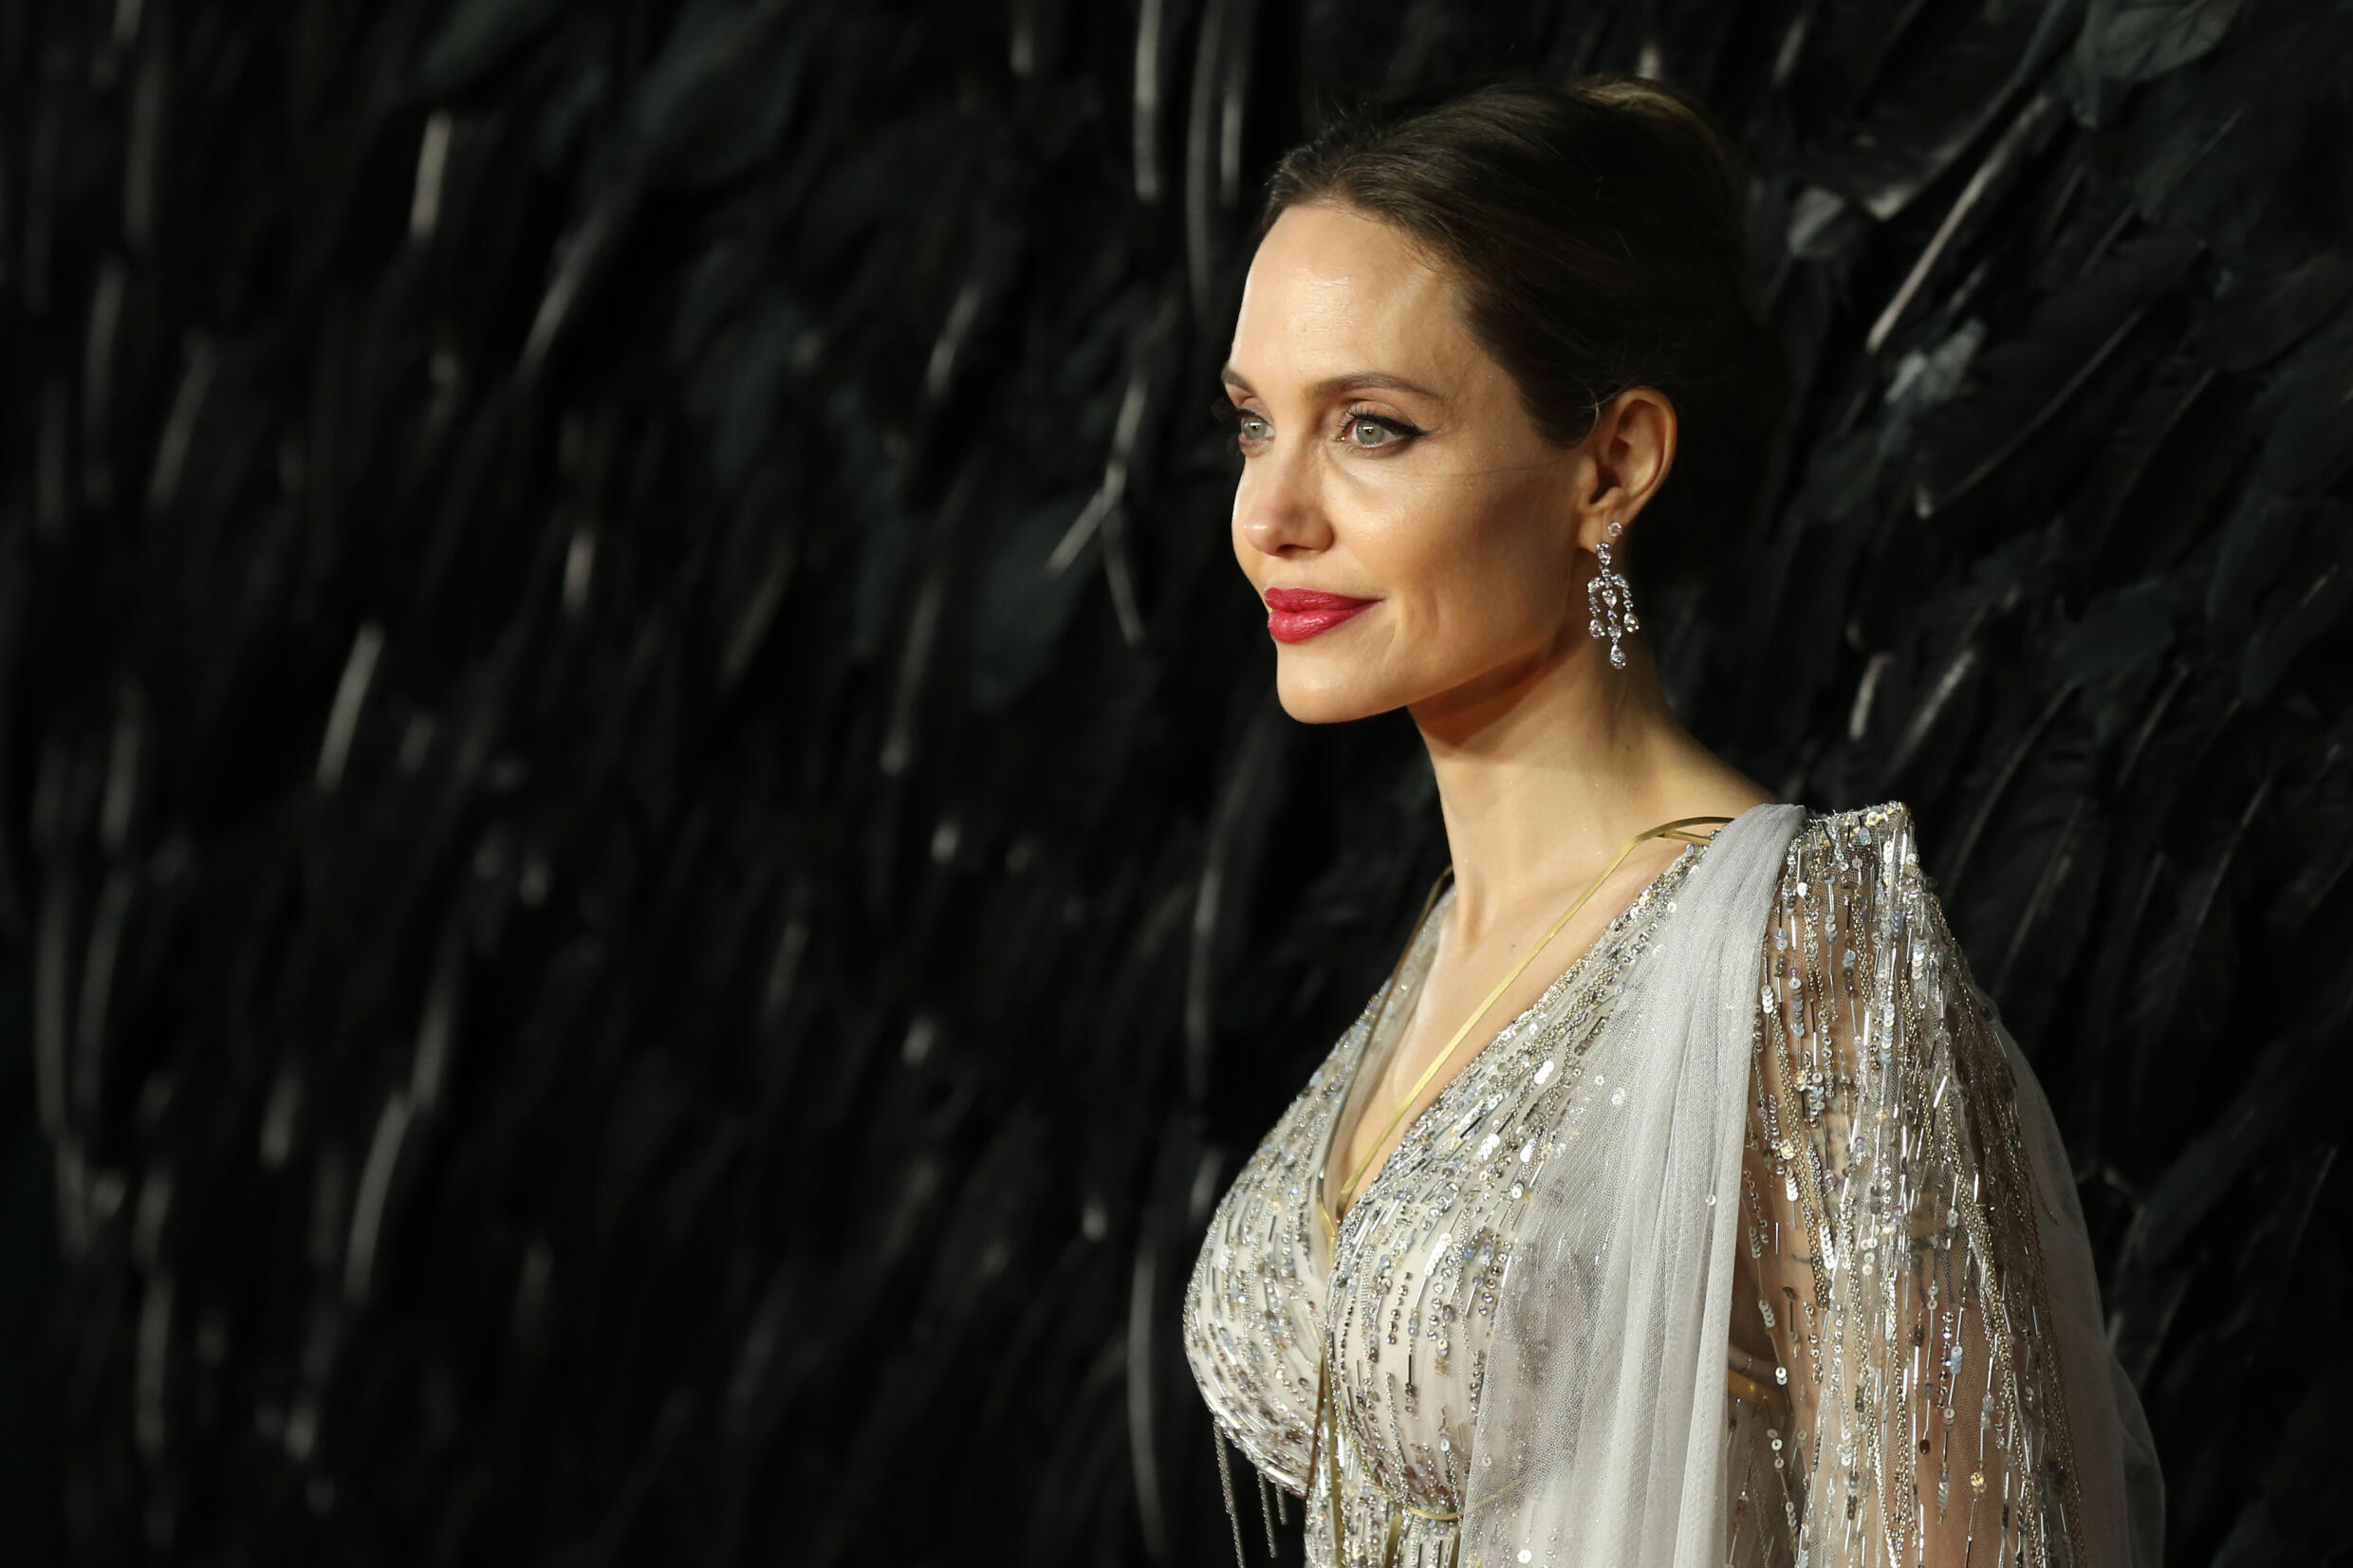 US actress Angelina Jolie, shown here on the red carpet in London on October 9, 2019, accused Harvey Weinstein of sexual misconduct